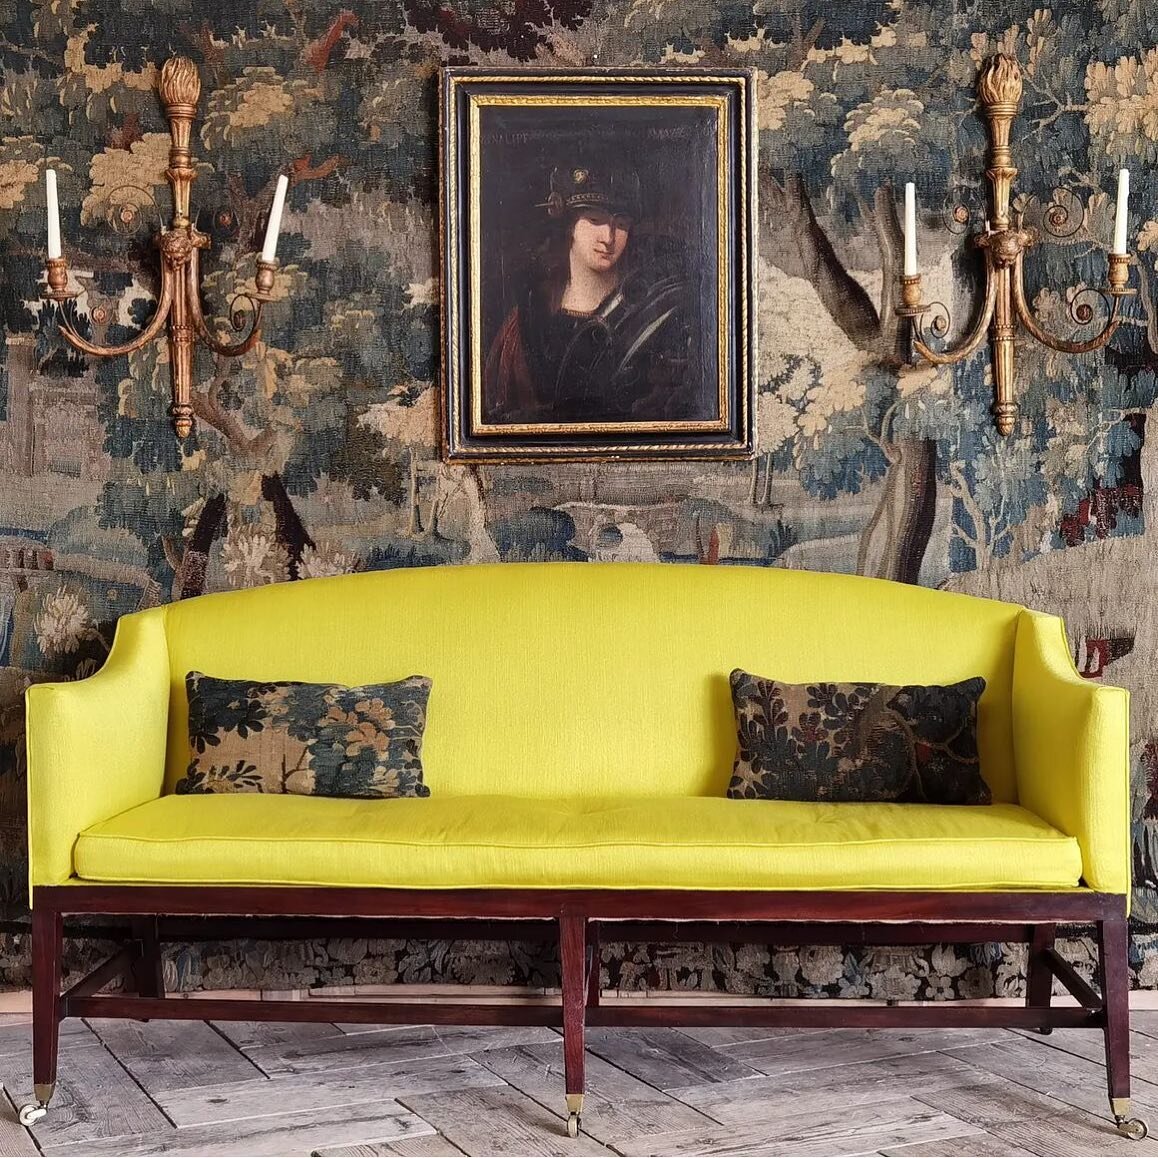 🍋The combo of the verdure tapestry and the eye watering yellow has us salivating! Punchy styling by the ever daring @brownrigguk in their beautiful Tetbury shop. 

.
.
.
#muralpainting #verdure #verduretapestry #tapestry #tapestries #yellow #sofa #s